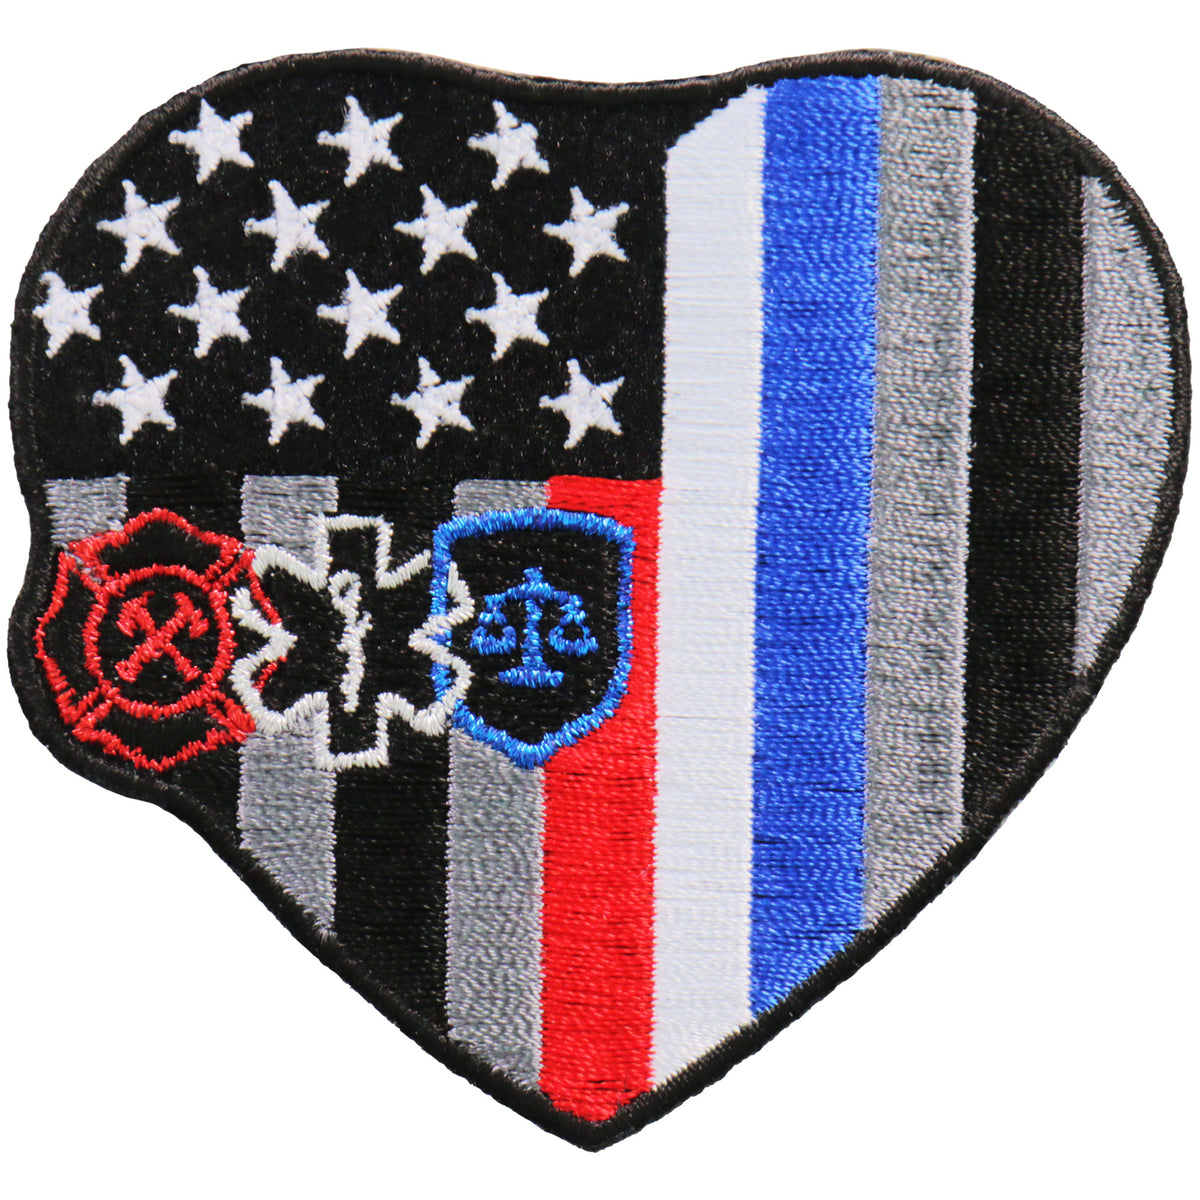 PATCH HEART RESPONDERS 3"